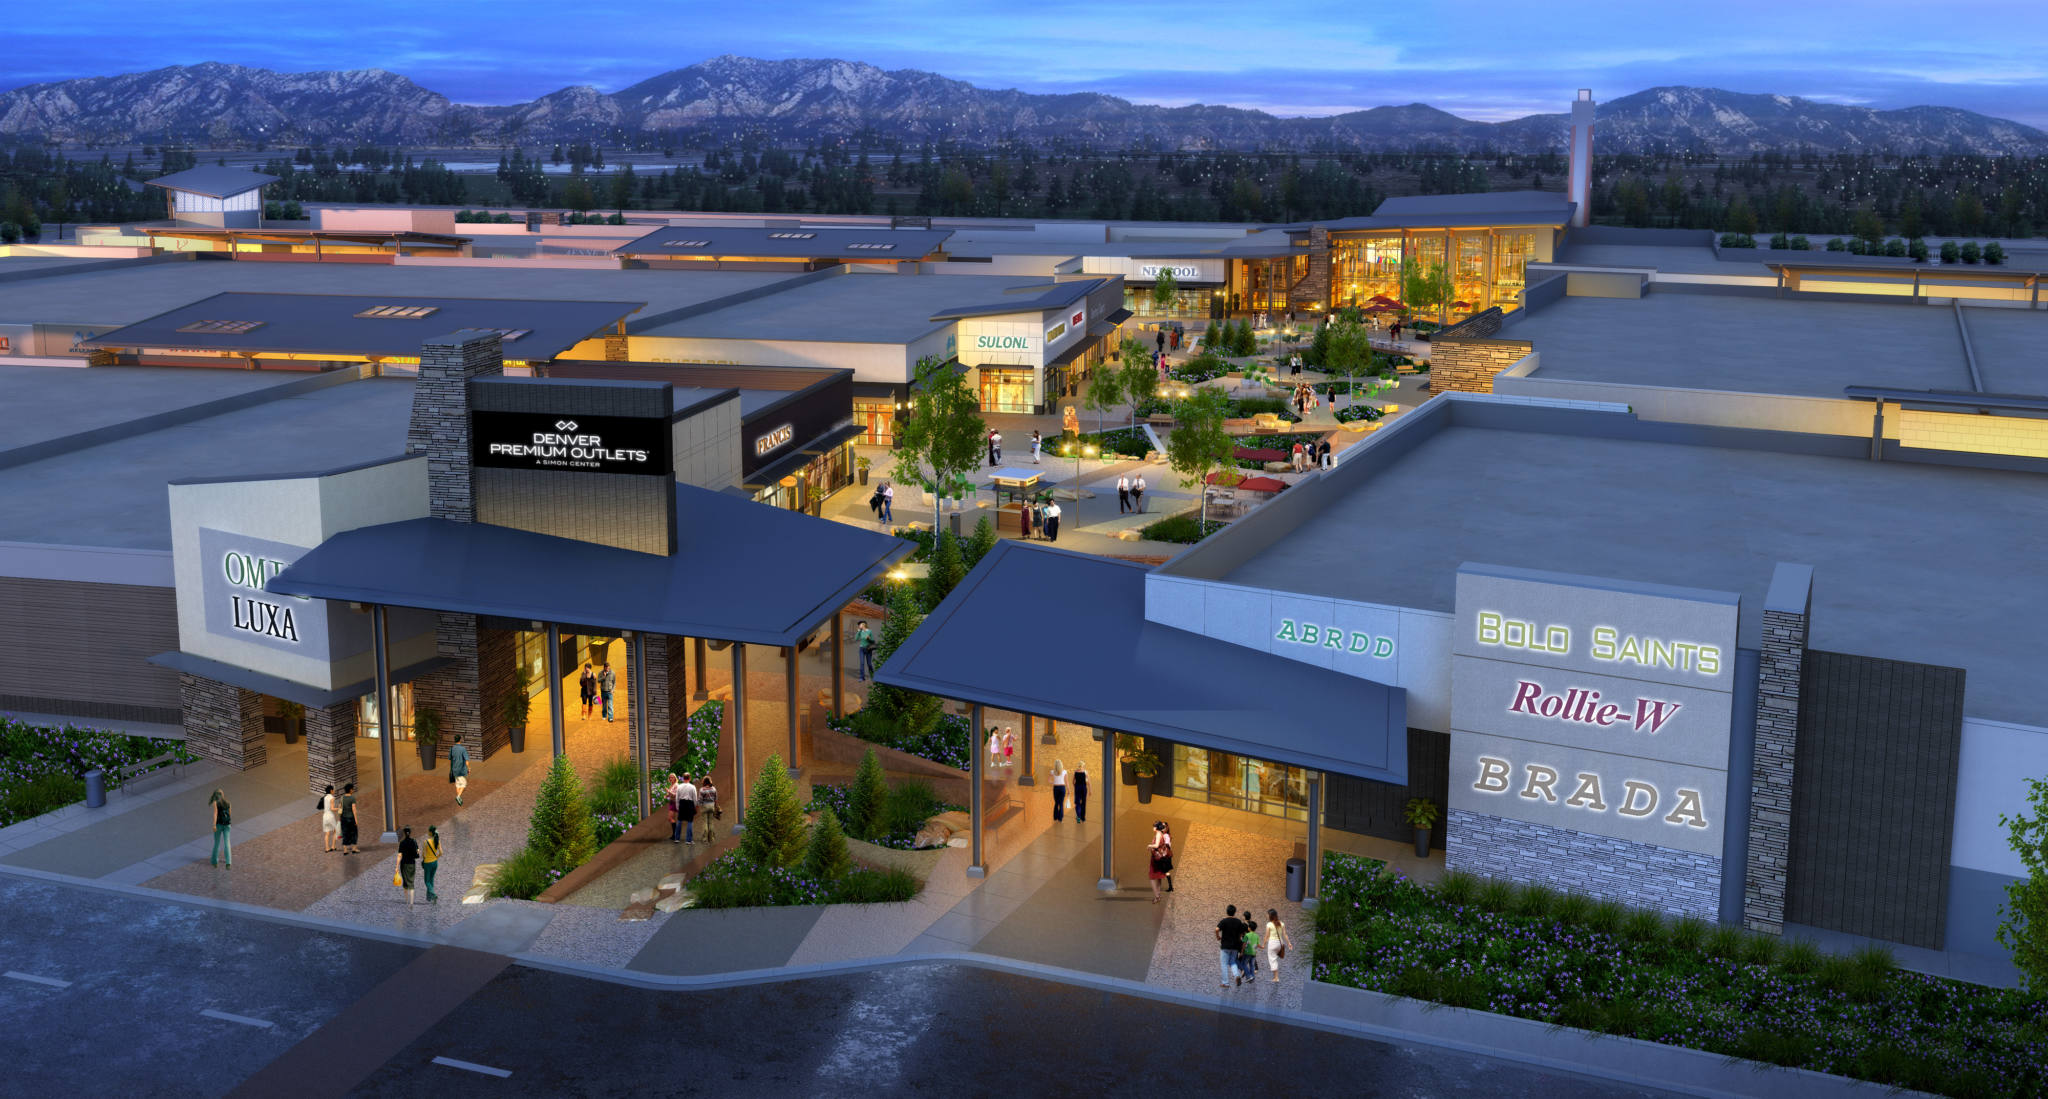 Denver Premium Outlets announces Grand Opening date of September 27, 2018  and confirms additional wave of new stores - Thornton OED